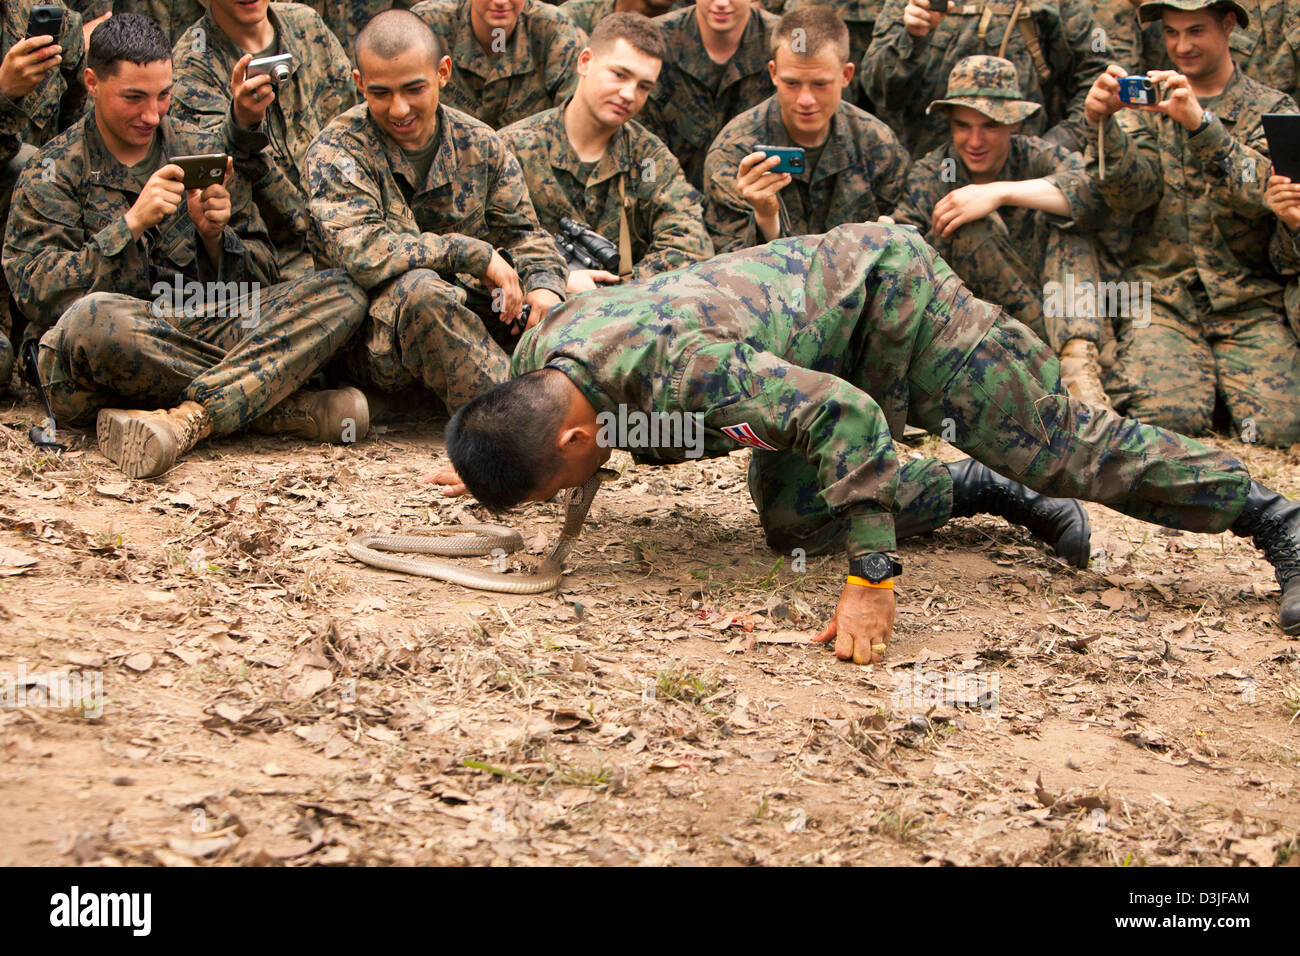 A Royal Thai Marine soldier demonstrates how to capture a live cobra snake to US Marines during a jungle survival course February 16, 2013 in Ban Chan Krem, Thailand. The class teaches Marines basic jungle survival techniques as part of Exercise Cobra Gold 2013. Stock Photo